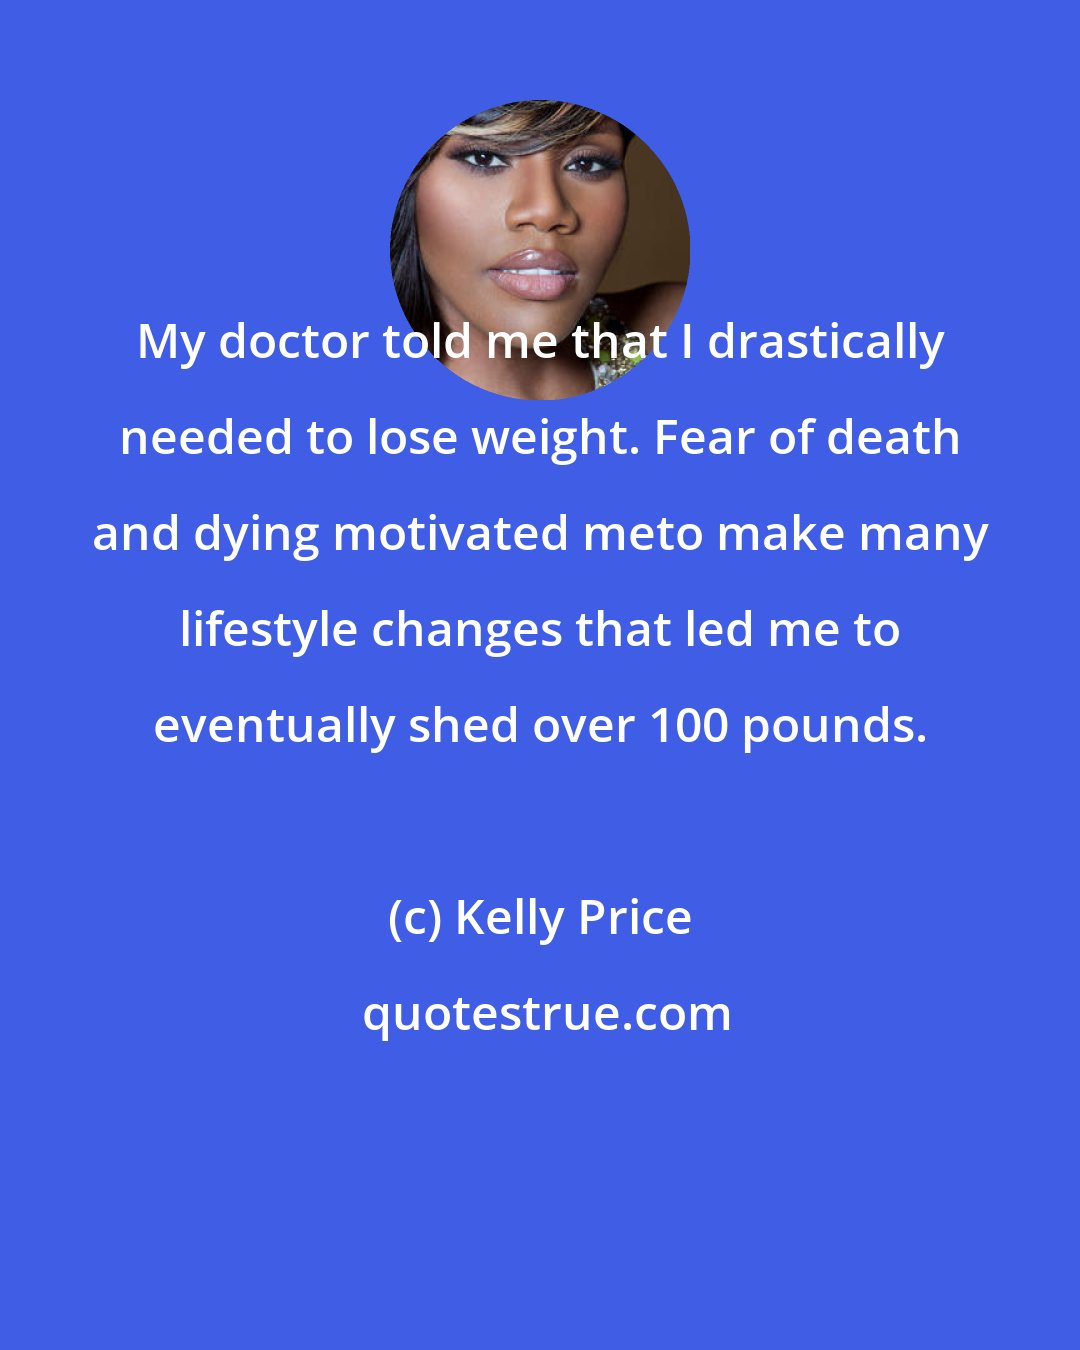 Kelly Price: My doctor told me that I drastically needed to lose weight. Fear of death and dying motivated meto make many lifestyle changes that led me to eventually shed over 100 pounds.